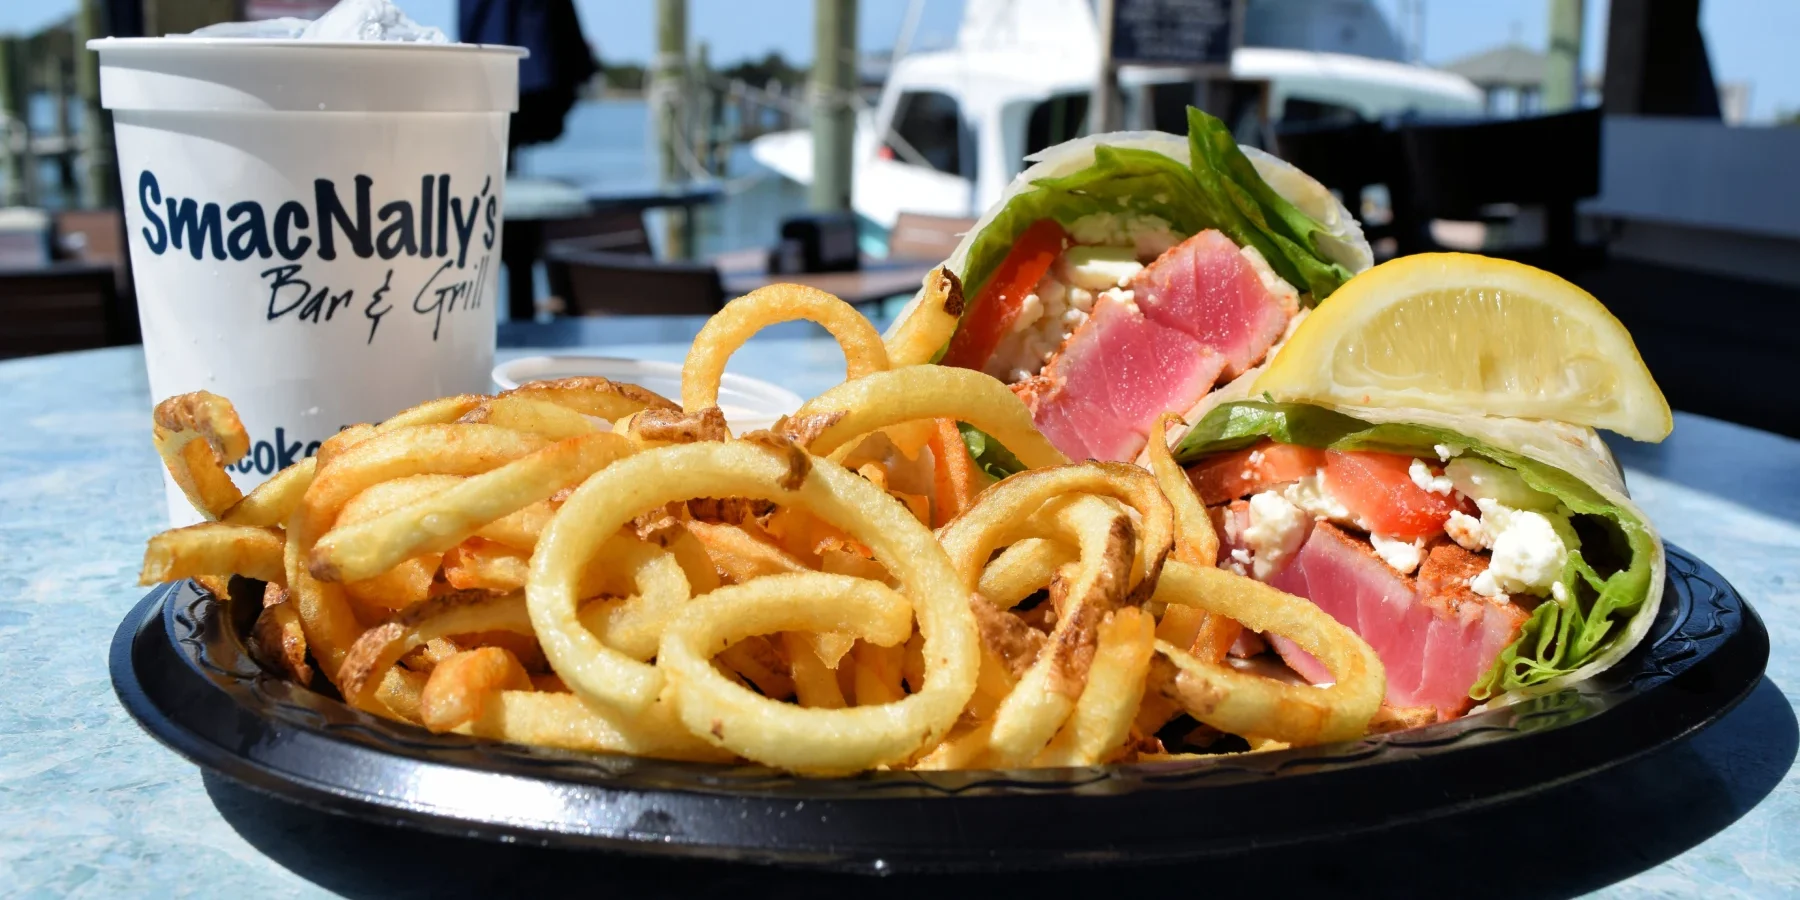 Ahi Tuna Sandwich Wrap with Curly Fries at SmacNallys Waterfront Bar and Grill - Hero